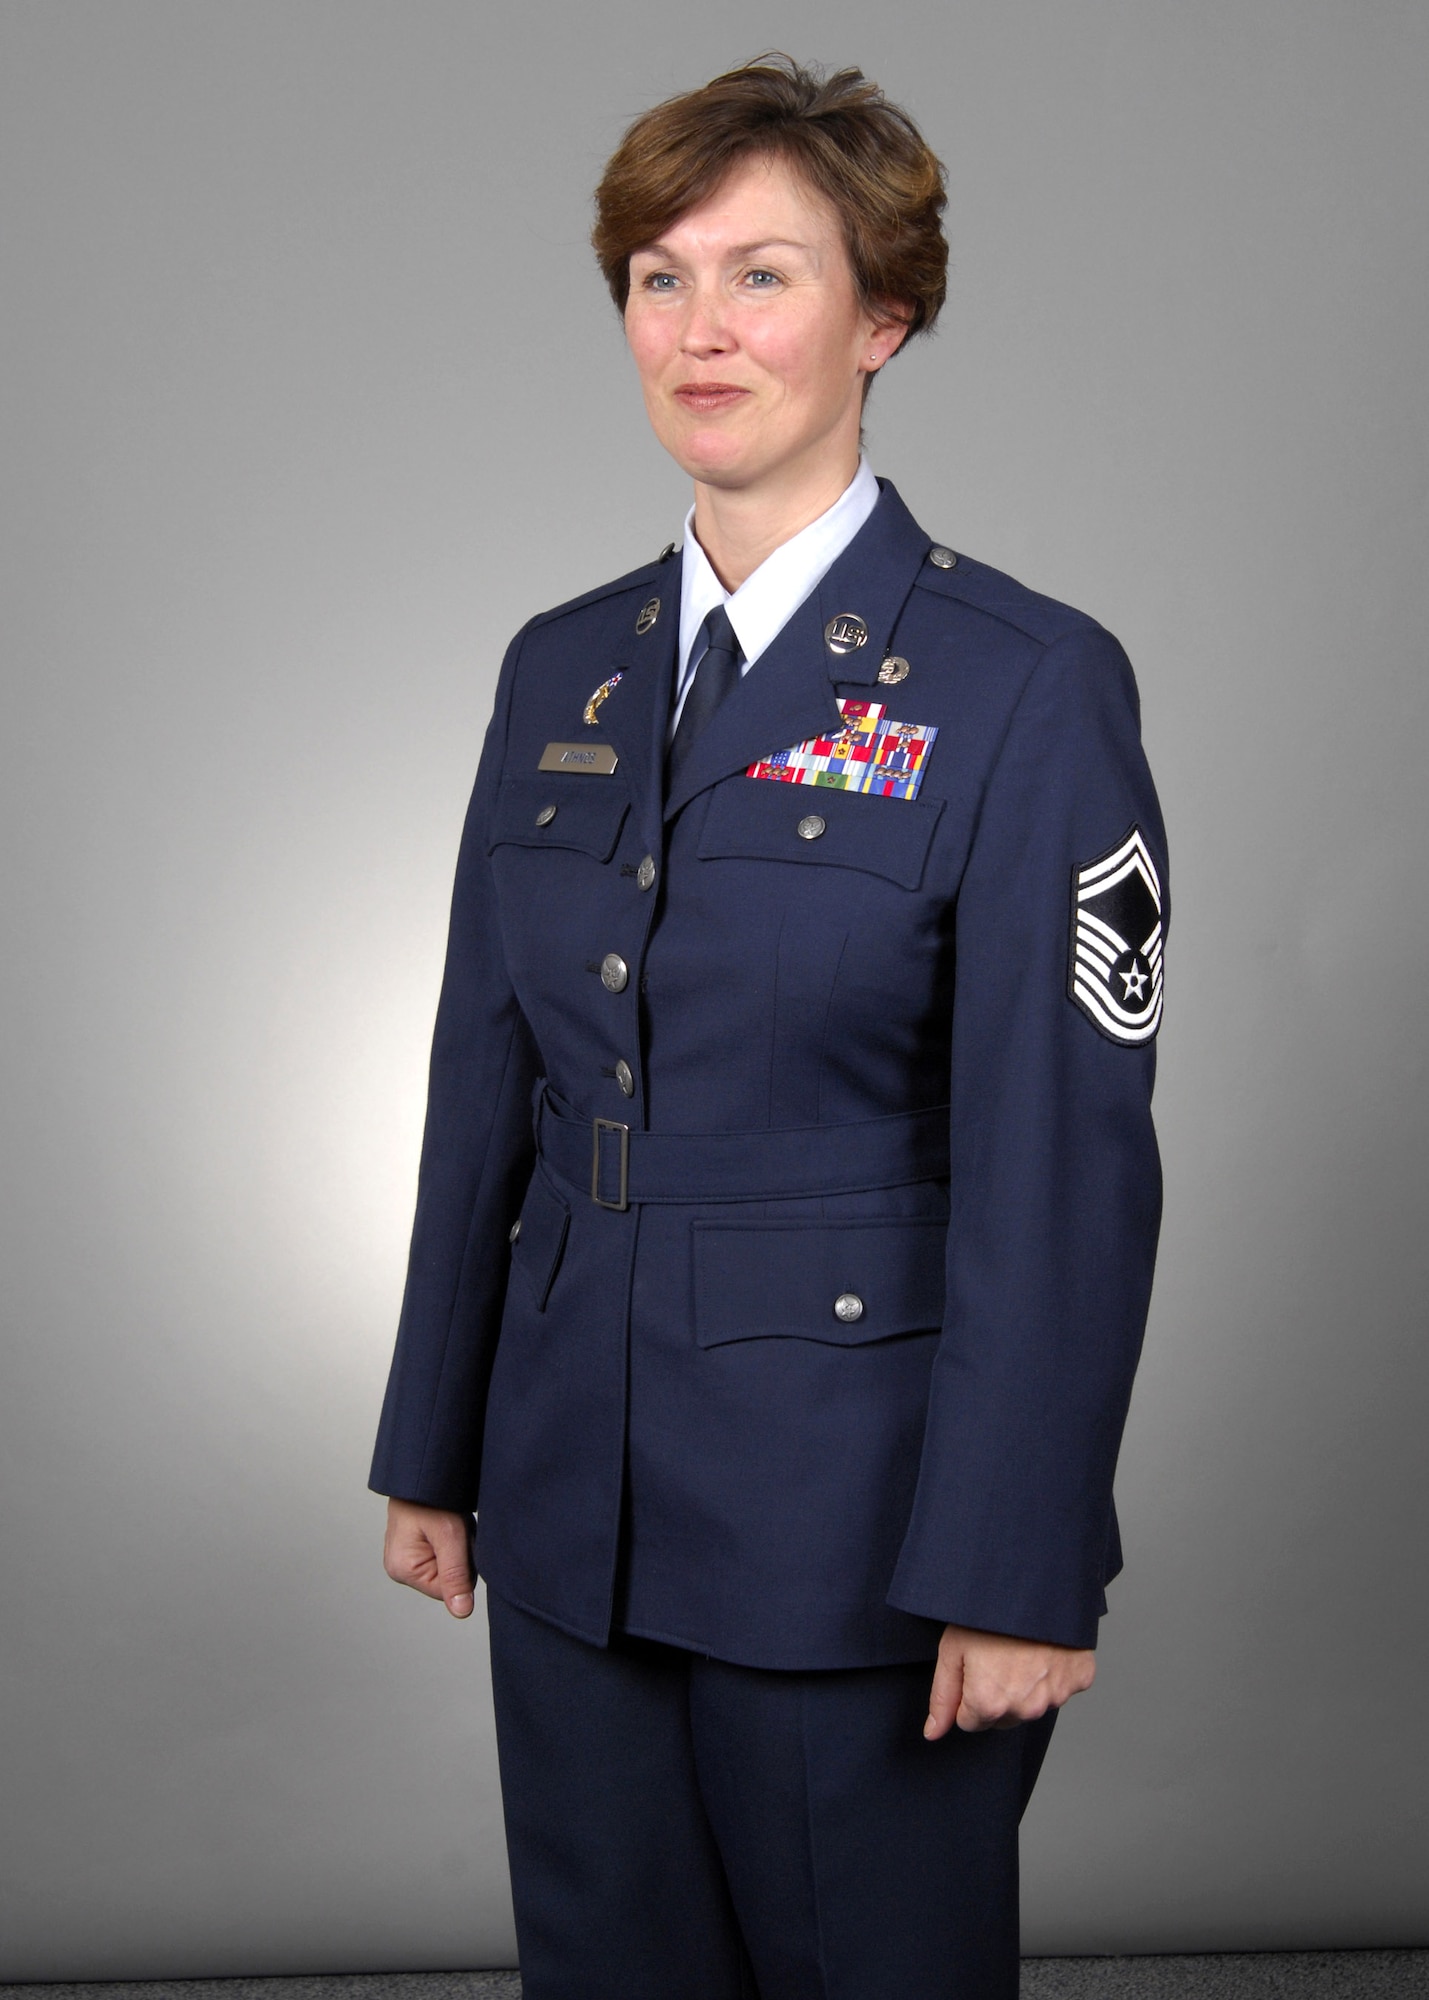 Senior Master Sgt. Dana Athnos models the new Air Force service dress Heritage Coat, designed on the uniform worn by Gen. Hap Arnold. The Air Force launches a fit test this fall with an actual 90-day wear test in the spring of 2008. According to Air Force leaders, the Heritage Coat will give the service a more military look that reflects the warrior ethos Airmen have today. (U.S. Air Force photo/Tech. Sgt. Cohen Young)